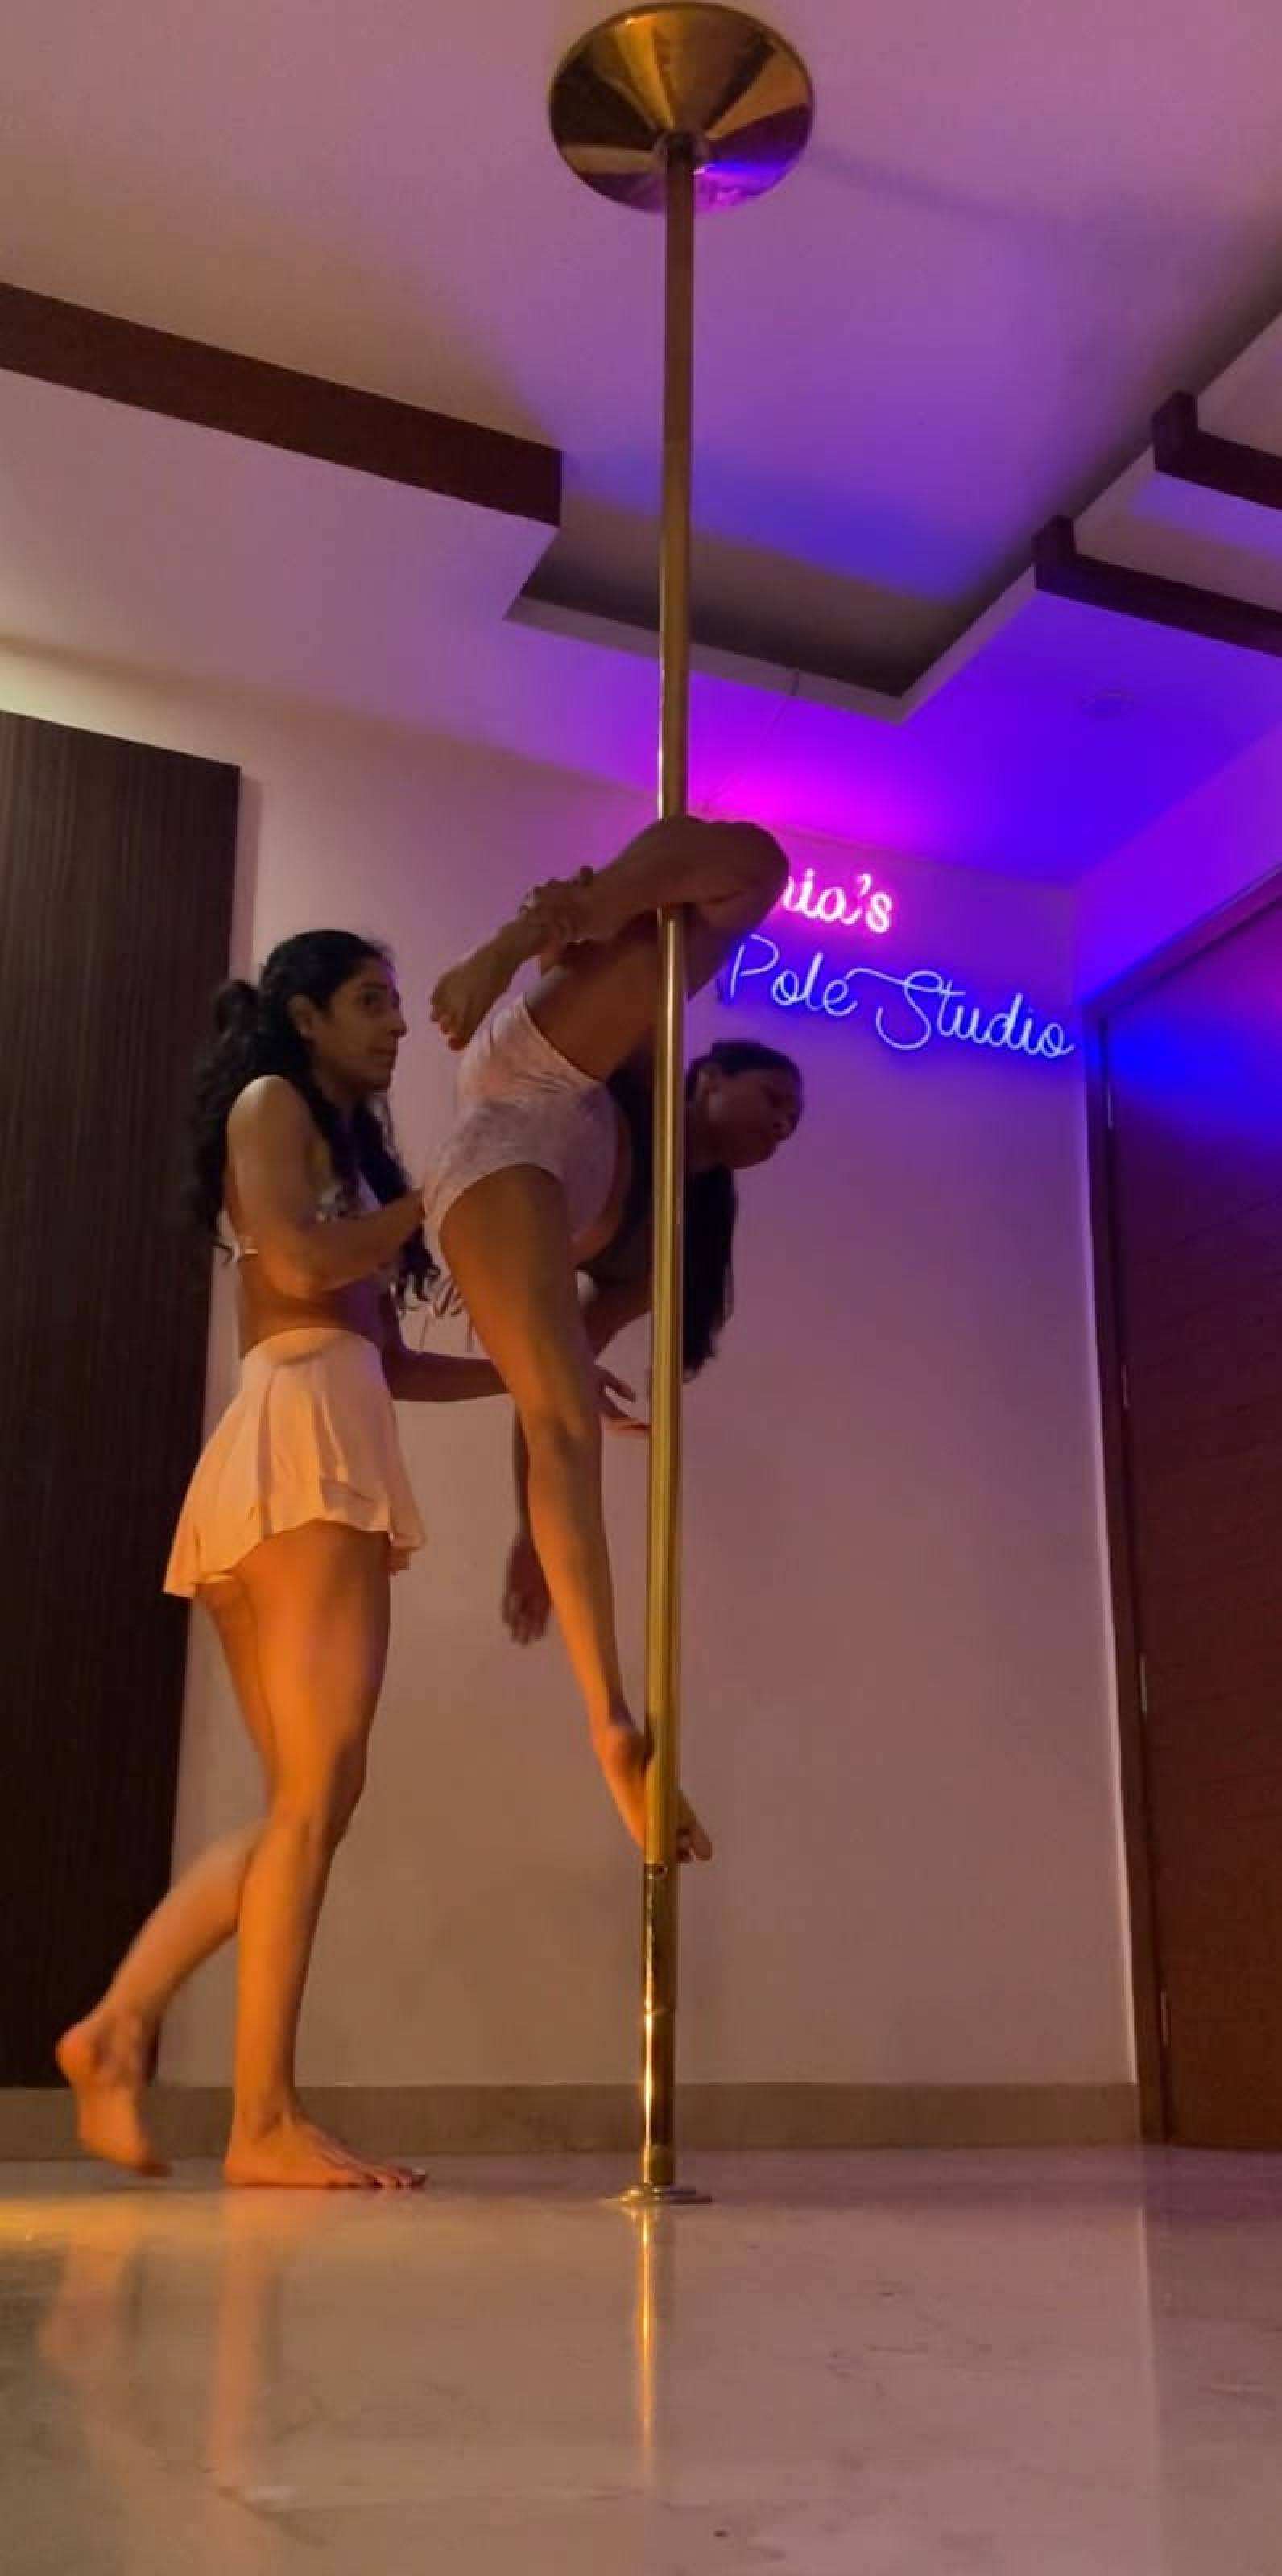 Pole dancing is a hot pandemic workout in conservative India – men